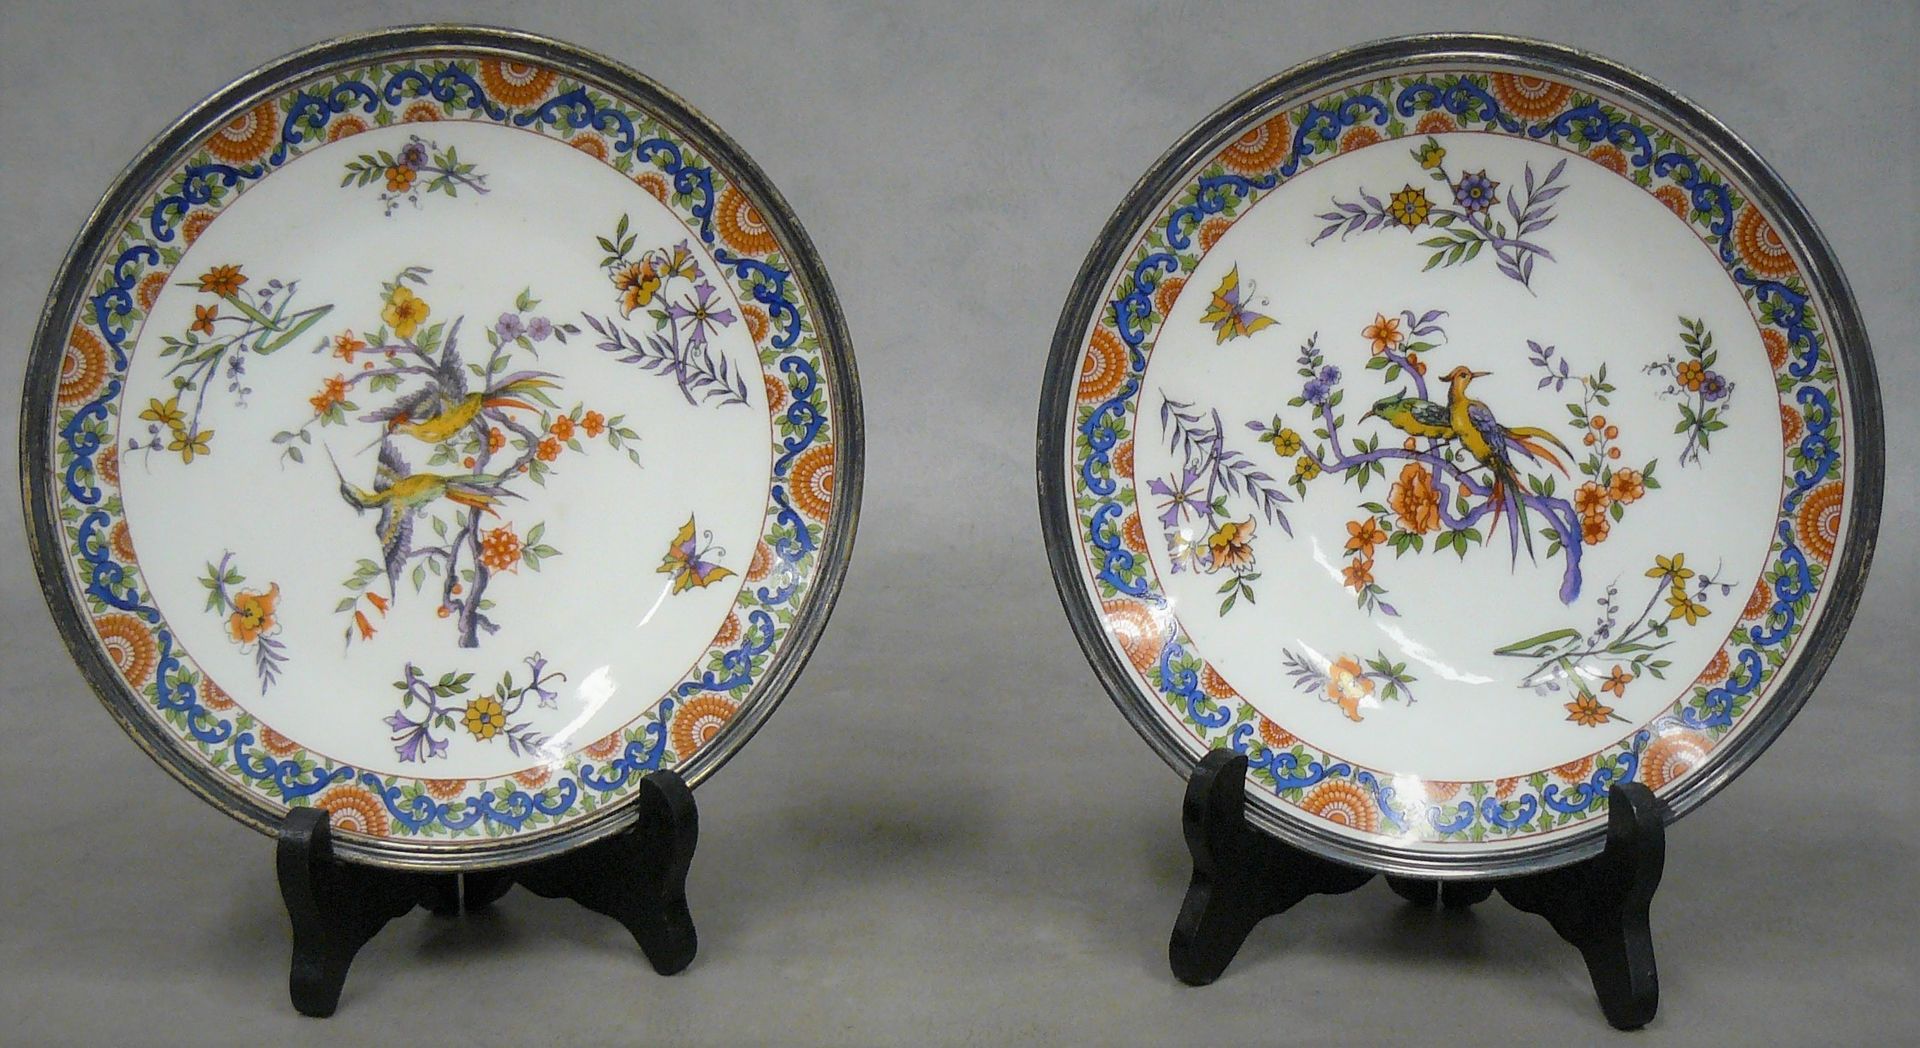 LIMOGES set of two small plates in Limoges porcelain, with metal rings and japan&hellip;